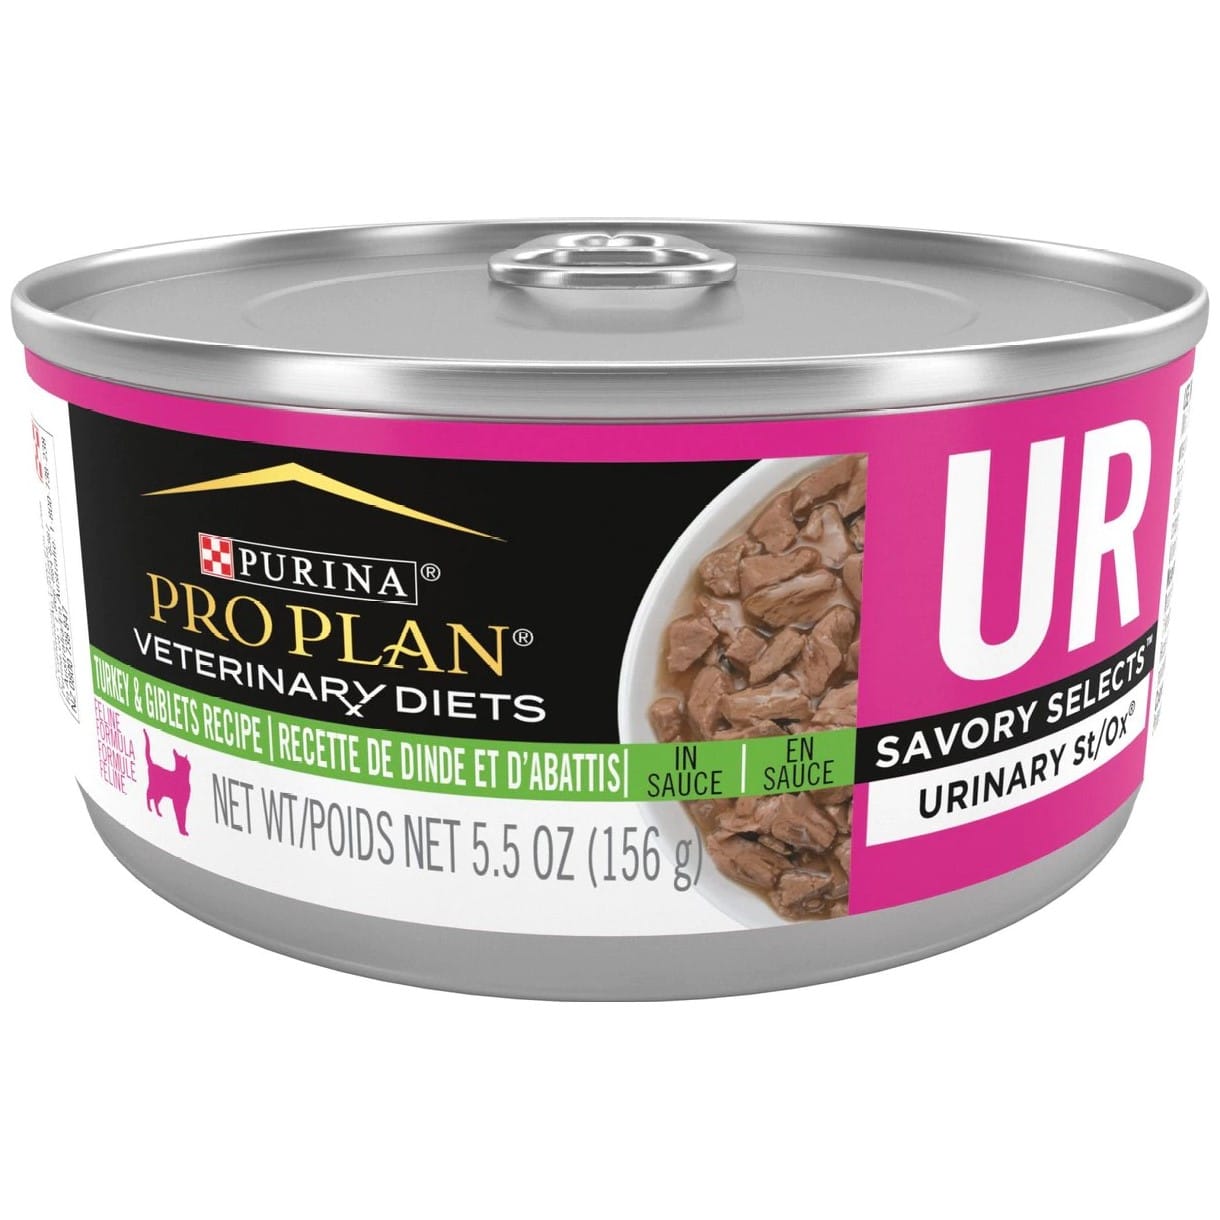 Purina Pro Plan Veterinary Diets UR Urinary St/Ox Savory Selects Turkey & Giblets in Sauce Wet Cat Food